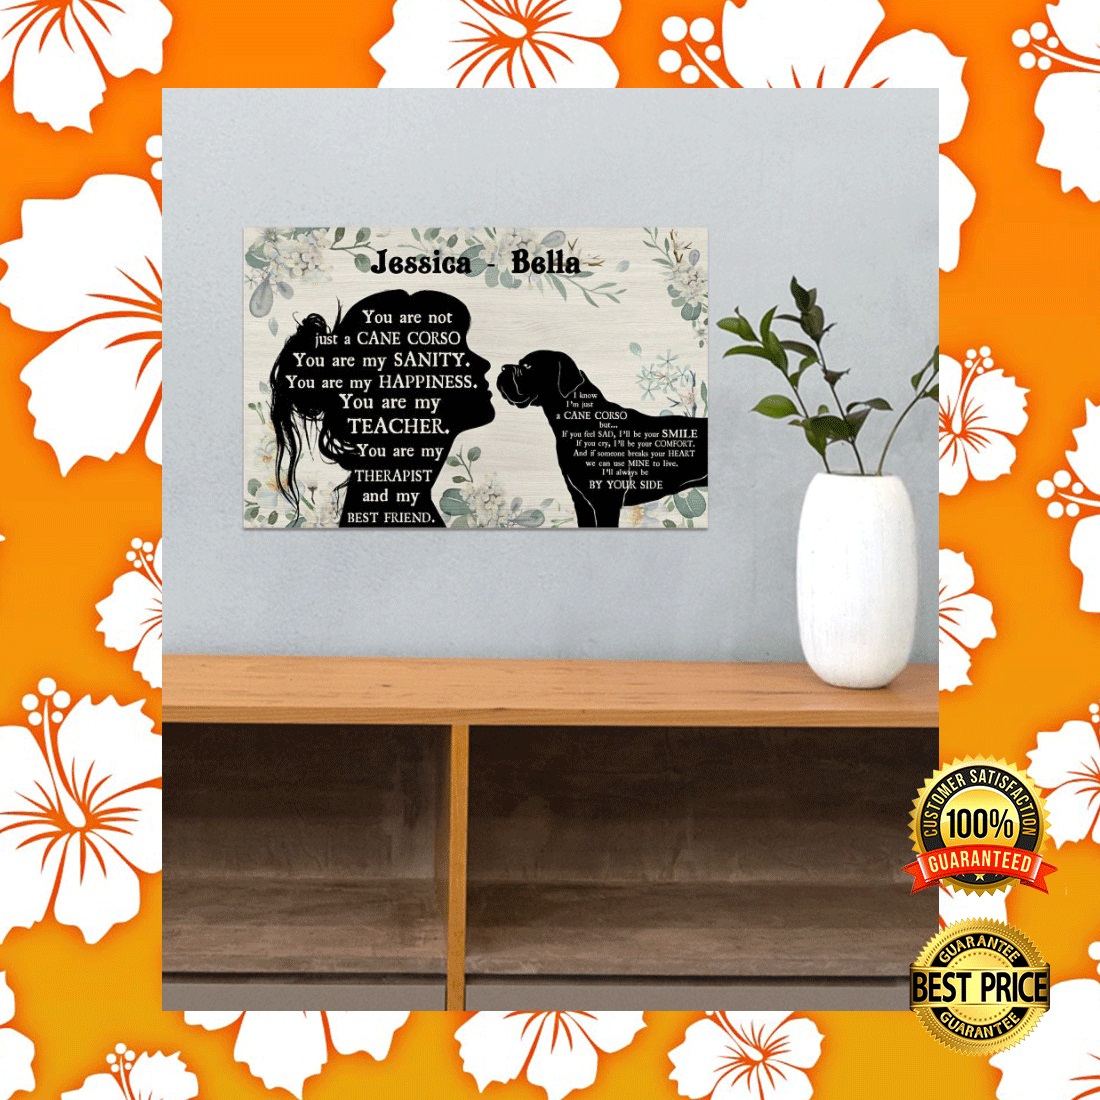 Personalized girl and Cane corse you are not just a Cane corse poster 2